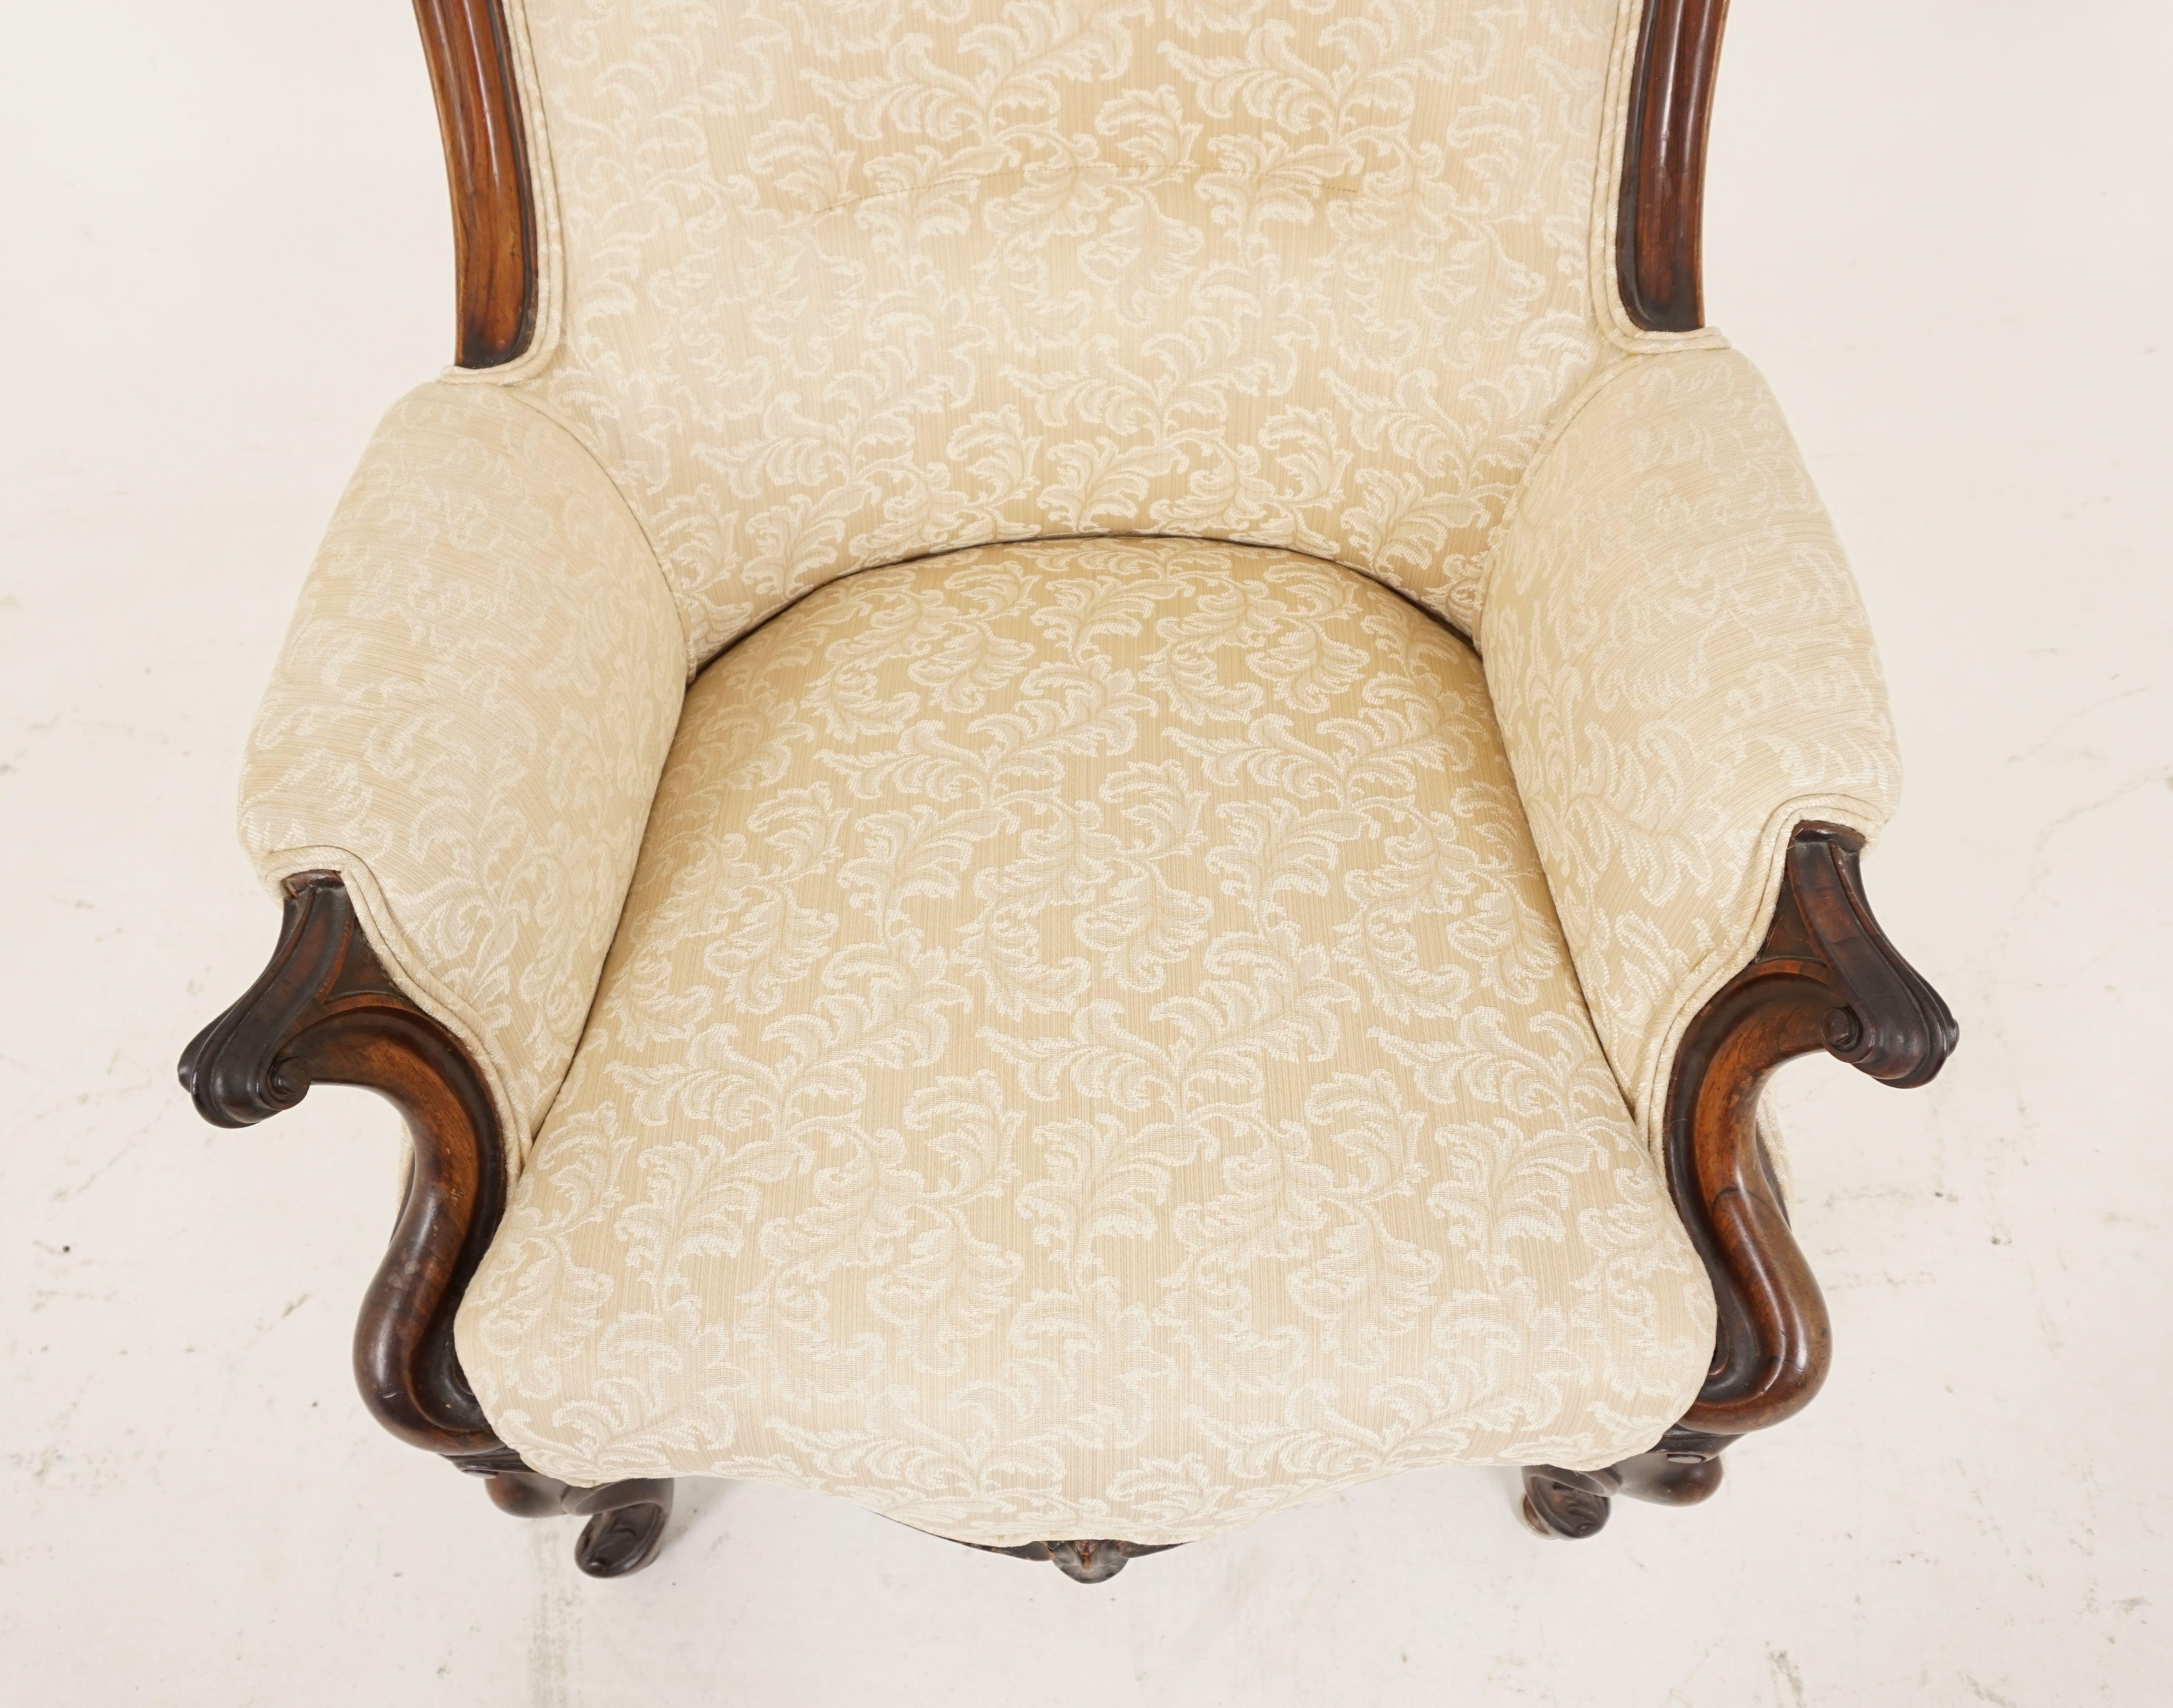 Antique Victorian Chair, Mahogany Framed Spoon Back Chair, Scotland 1880, B2083

Scotland 1880
Solid Mahogany
Original Finish To The Wood
Small Carved Top Rail 
Upholstered Back And Seat
Carved Front Arms
Standing On Beautifully Carved Legs